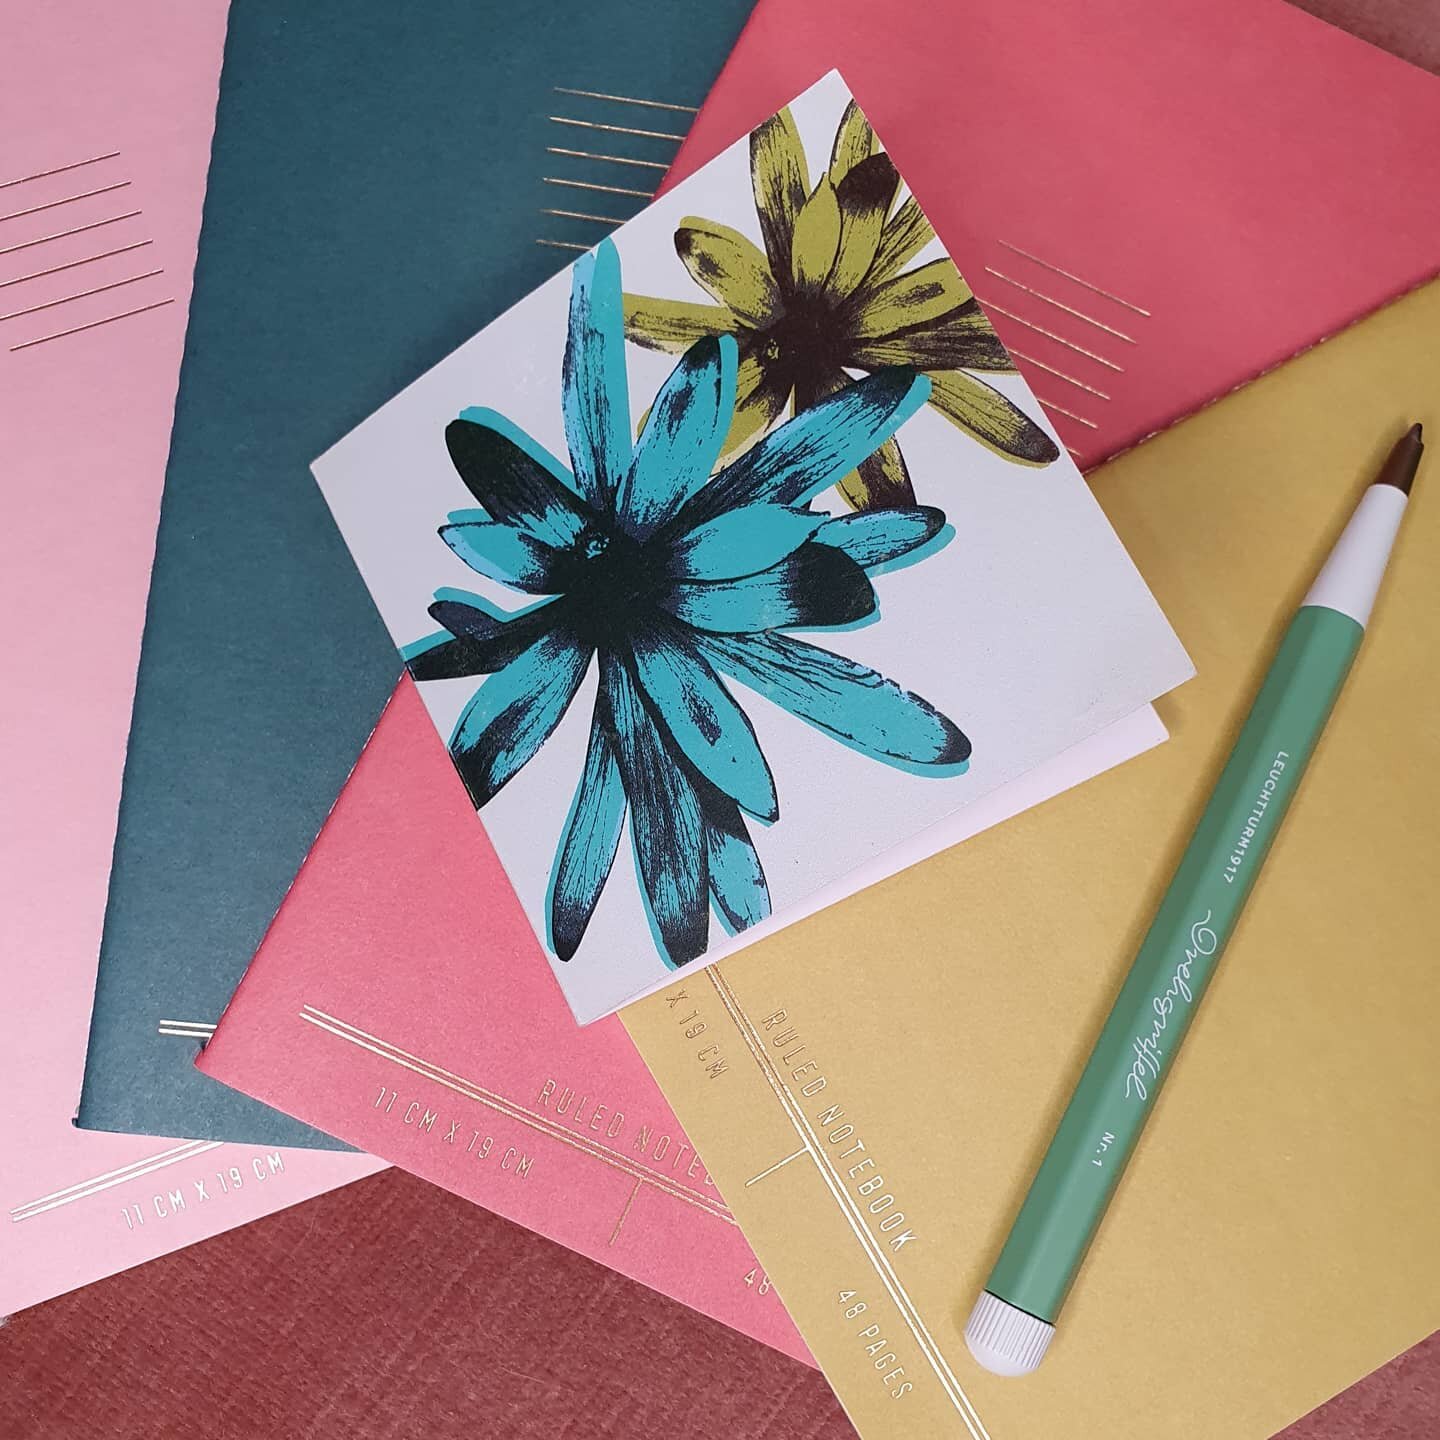 These are a few of my favourite things! All available at Paperpoint South Melbourne. Come grab one of my greeting &amp; gift cards ready for Mother's Day! Pictured &quot;Native Star&quot; small gift card!
.
.
.
.
.
#paperpointaustralia #leuchtturm191